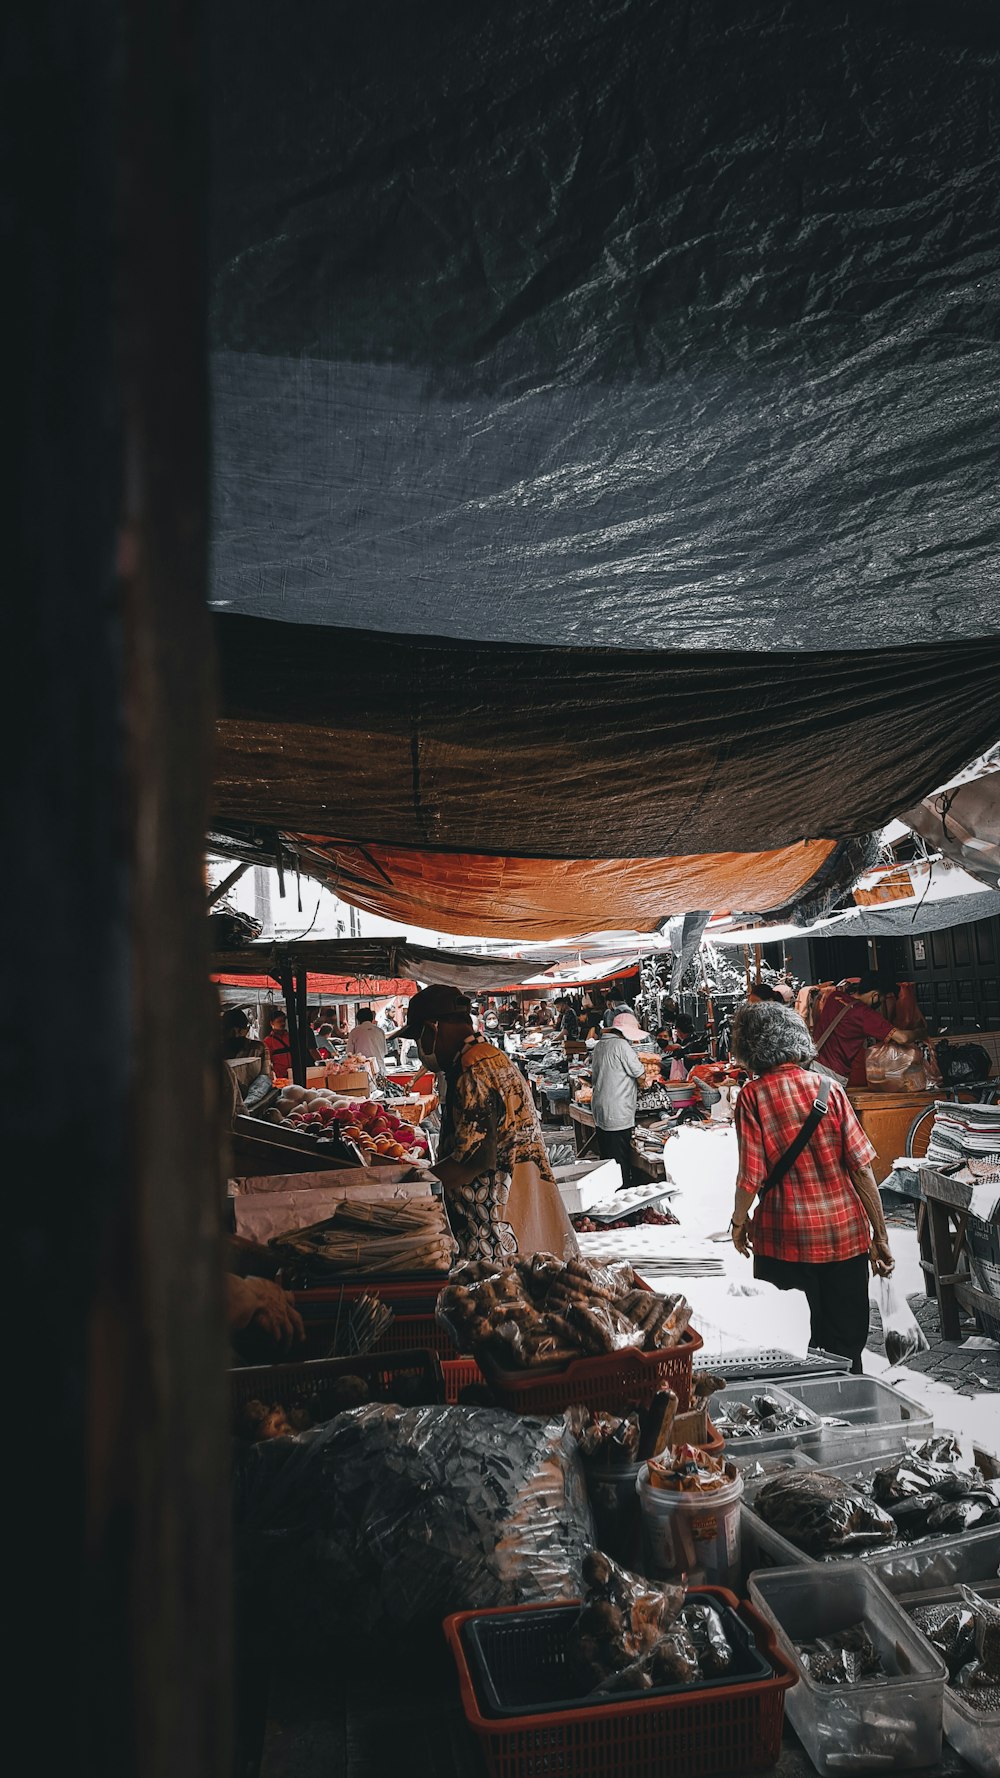 a woman walking through a market with lots of food